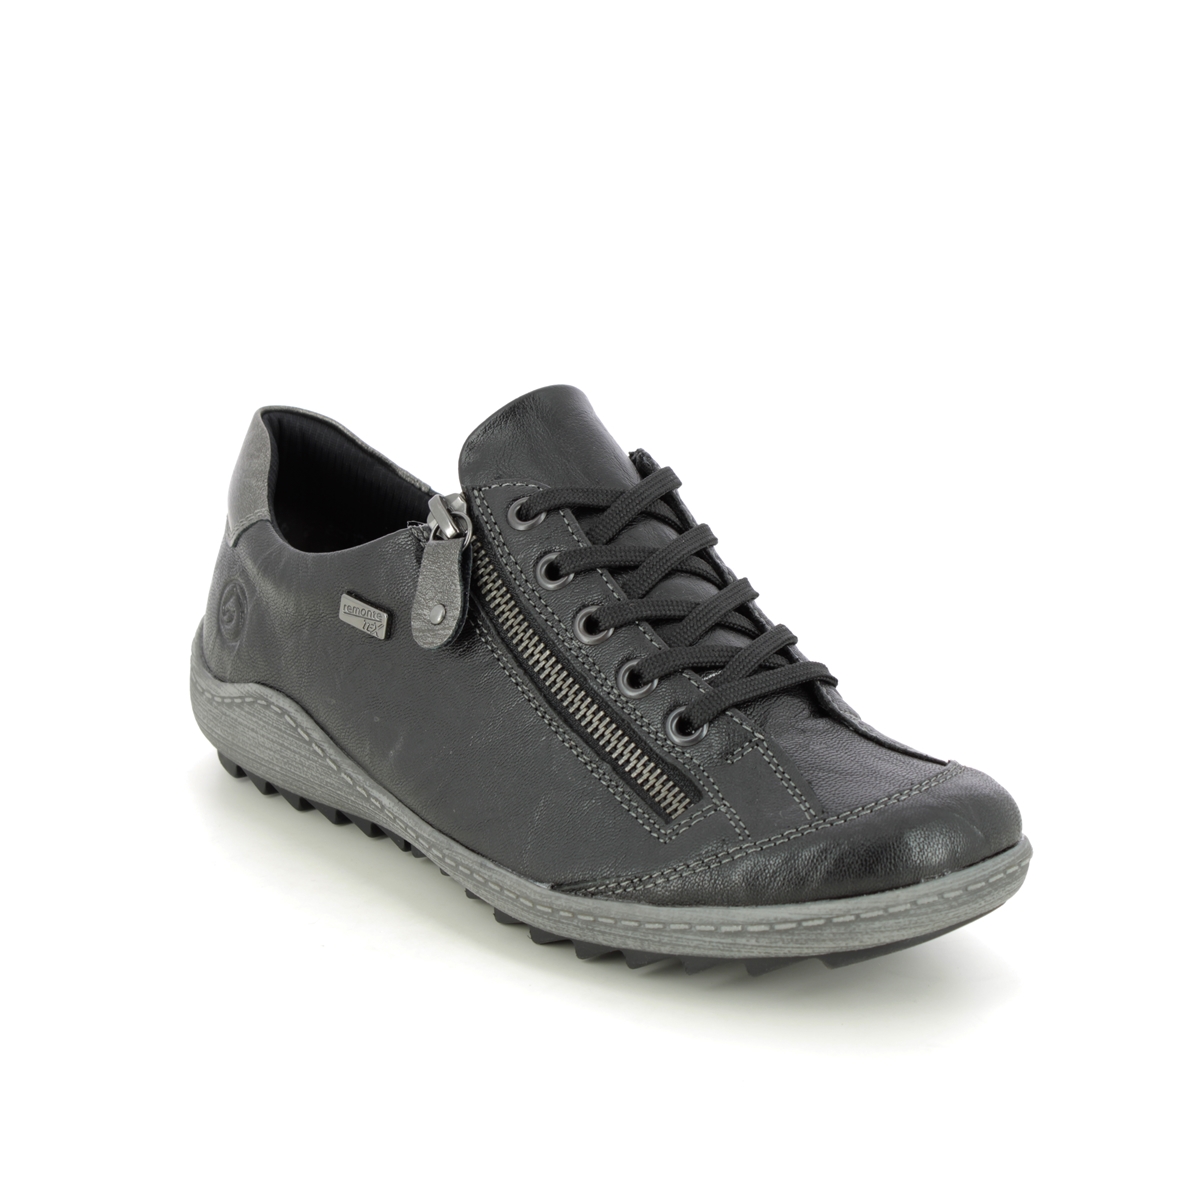 Remonte Zigzip 85 Tex Black Leather Womens Lacing Shoes R1402-06 In Size 37 In Plain Black Leather